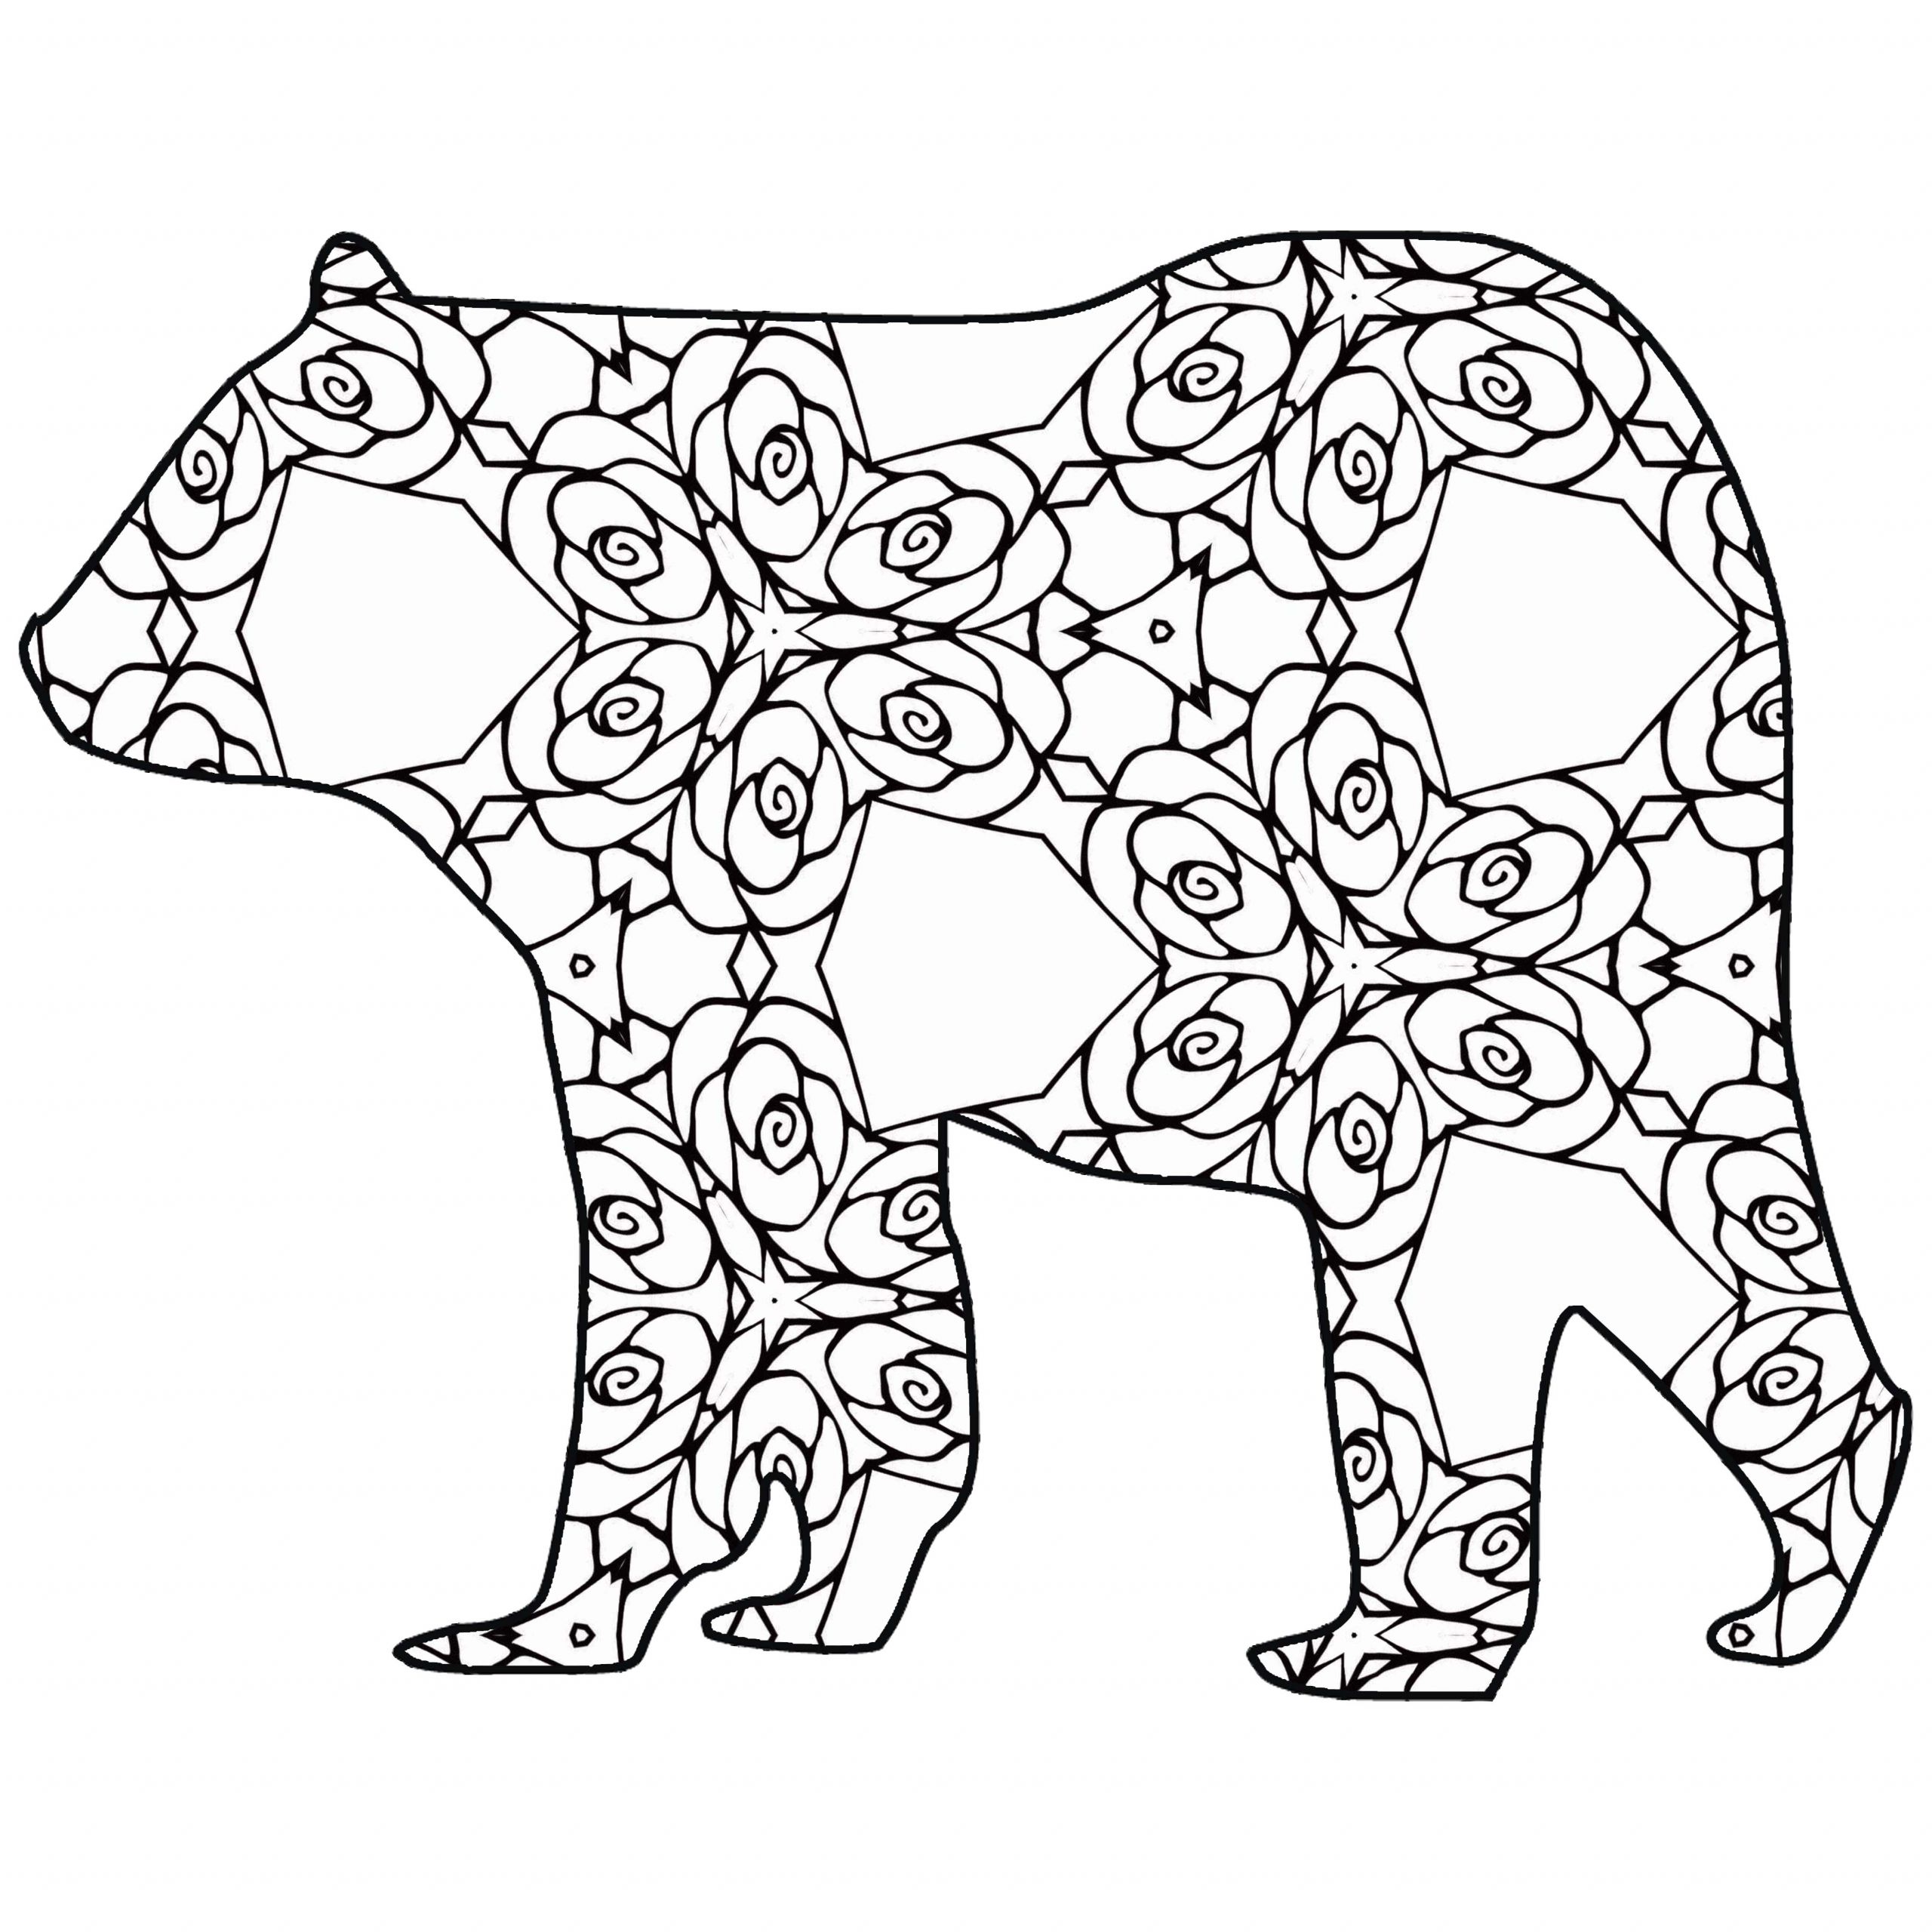 Free Printable Coloring Pages Animals
 30 Free Printable Geometric Animal Coloring Pages